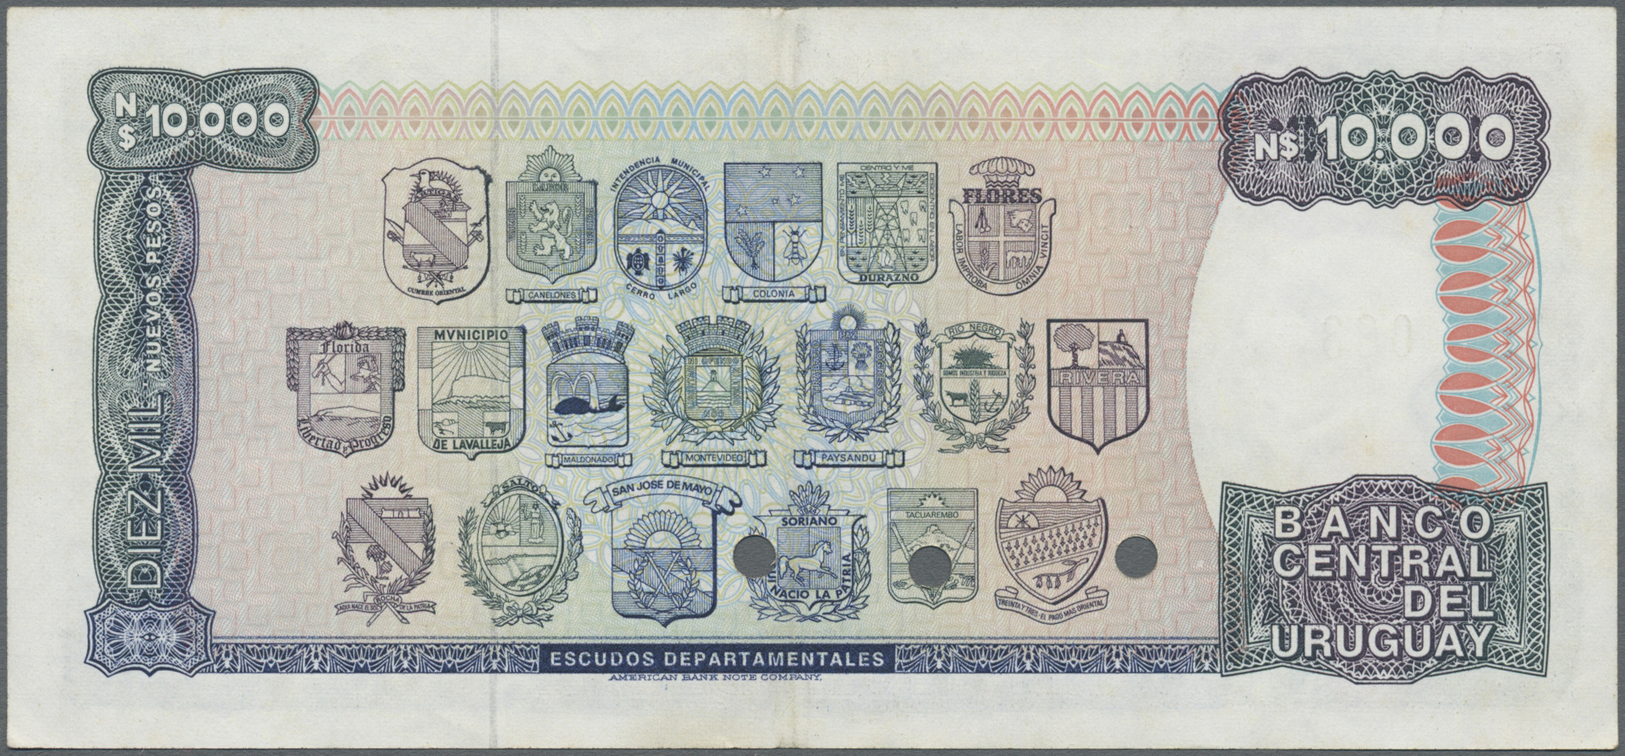 03479 Uruguay: 10.000 Pesos ND Specimen P. 67s With Light Center Bend In Condition: XF+ To AUNC. - Uruguay